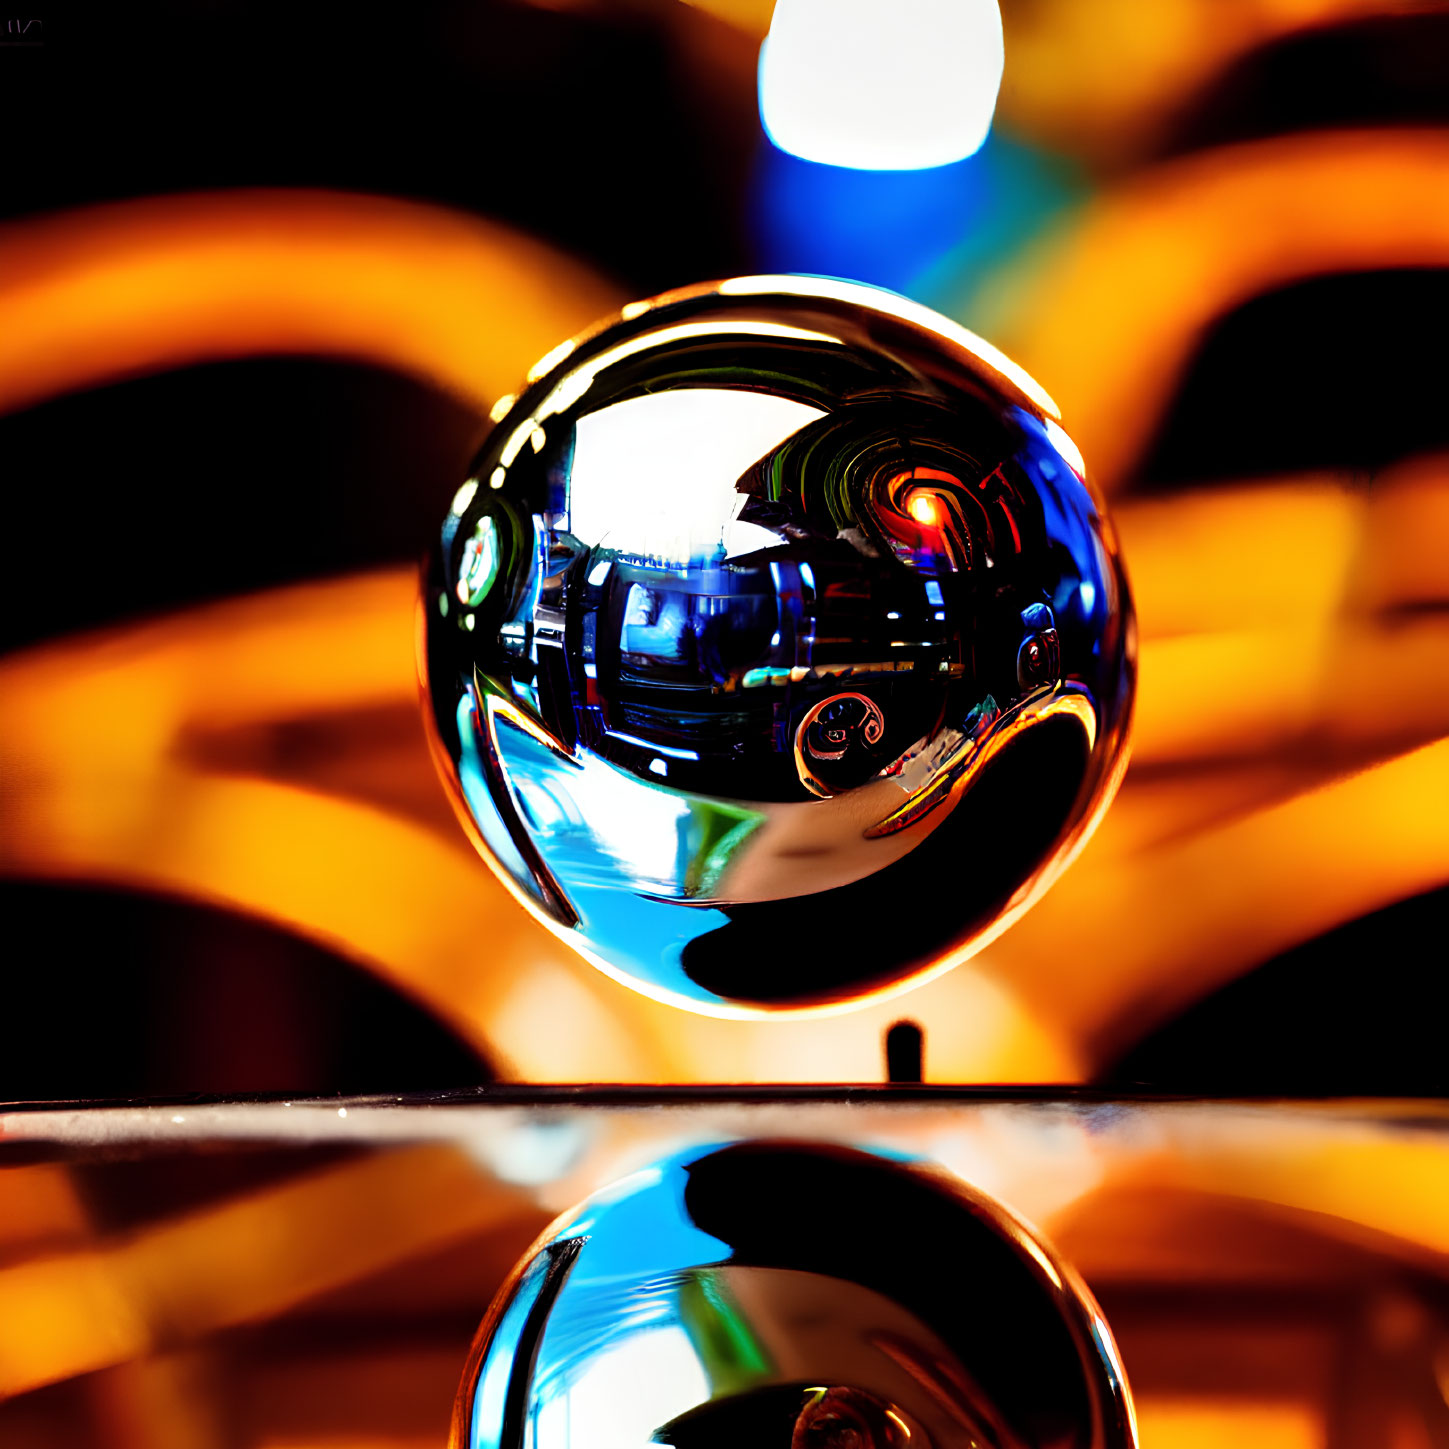 Crystal ball reflecting warm-toned room on reflective surface with bokeh effect